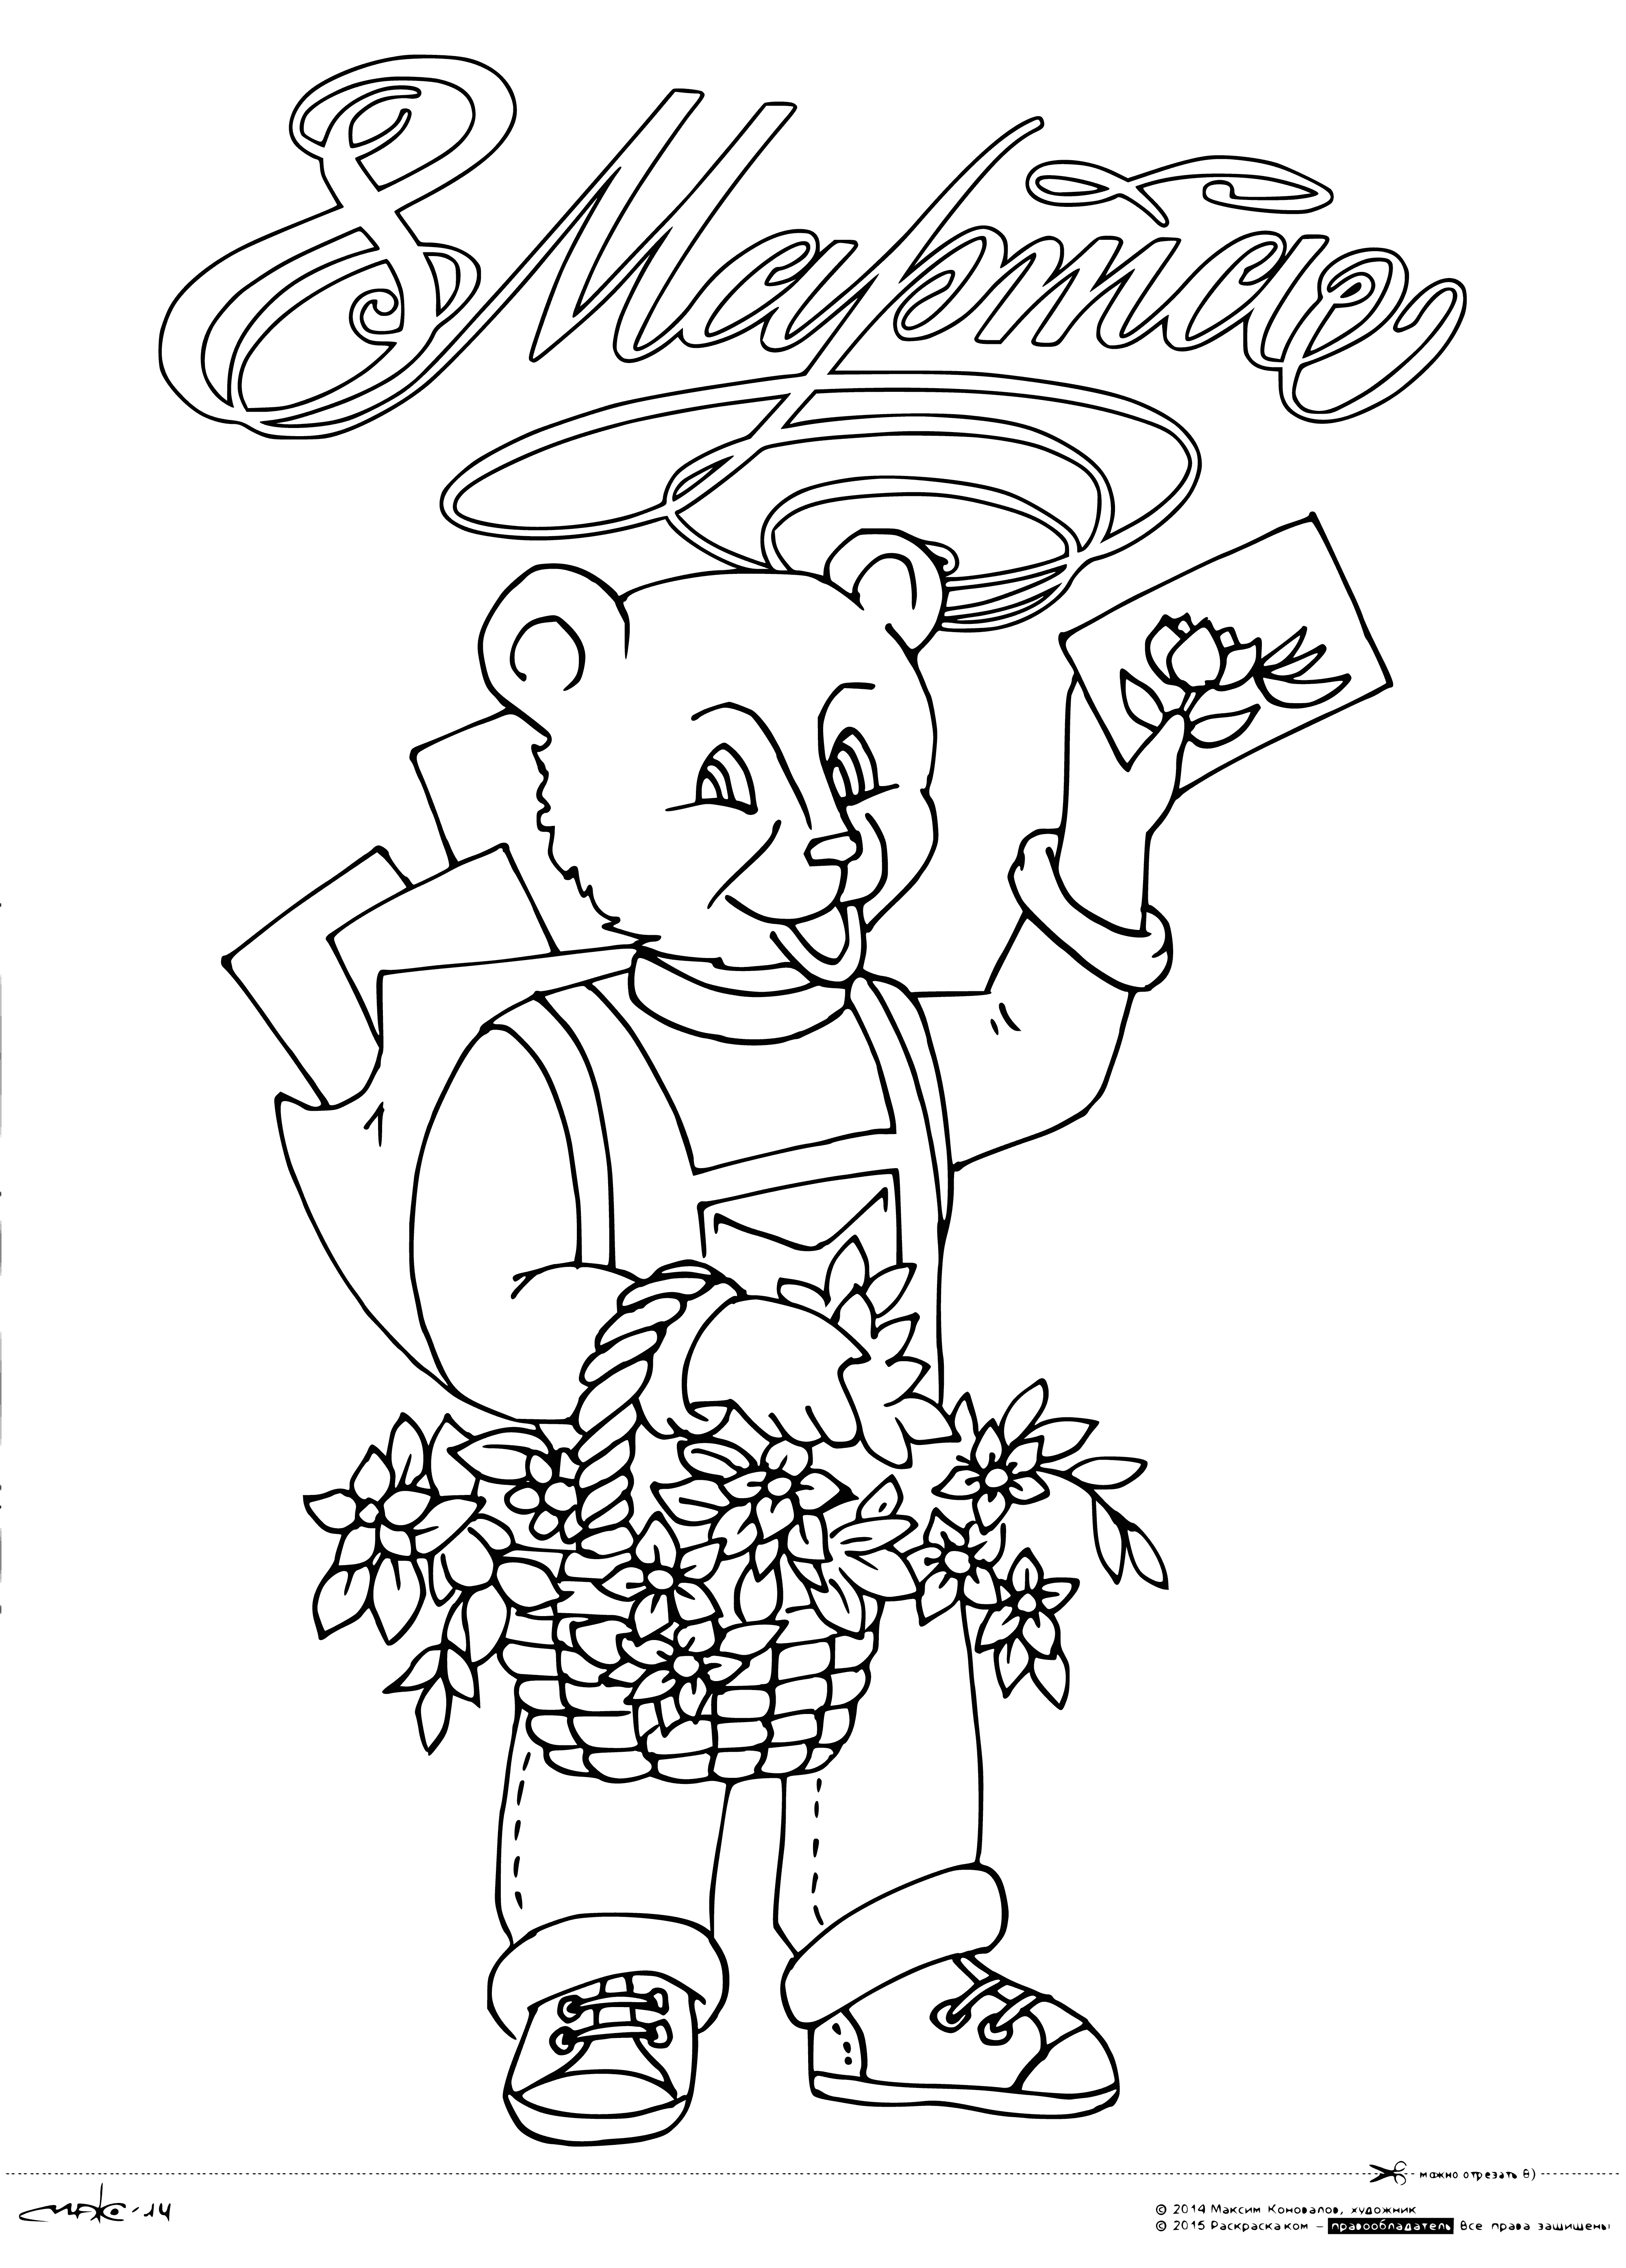 March 8 coloring page